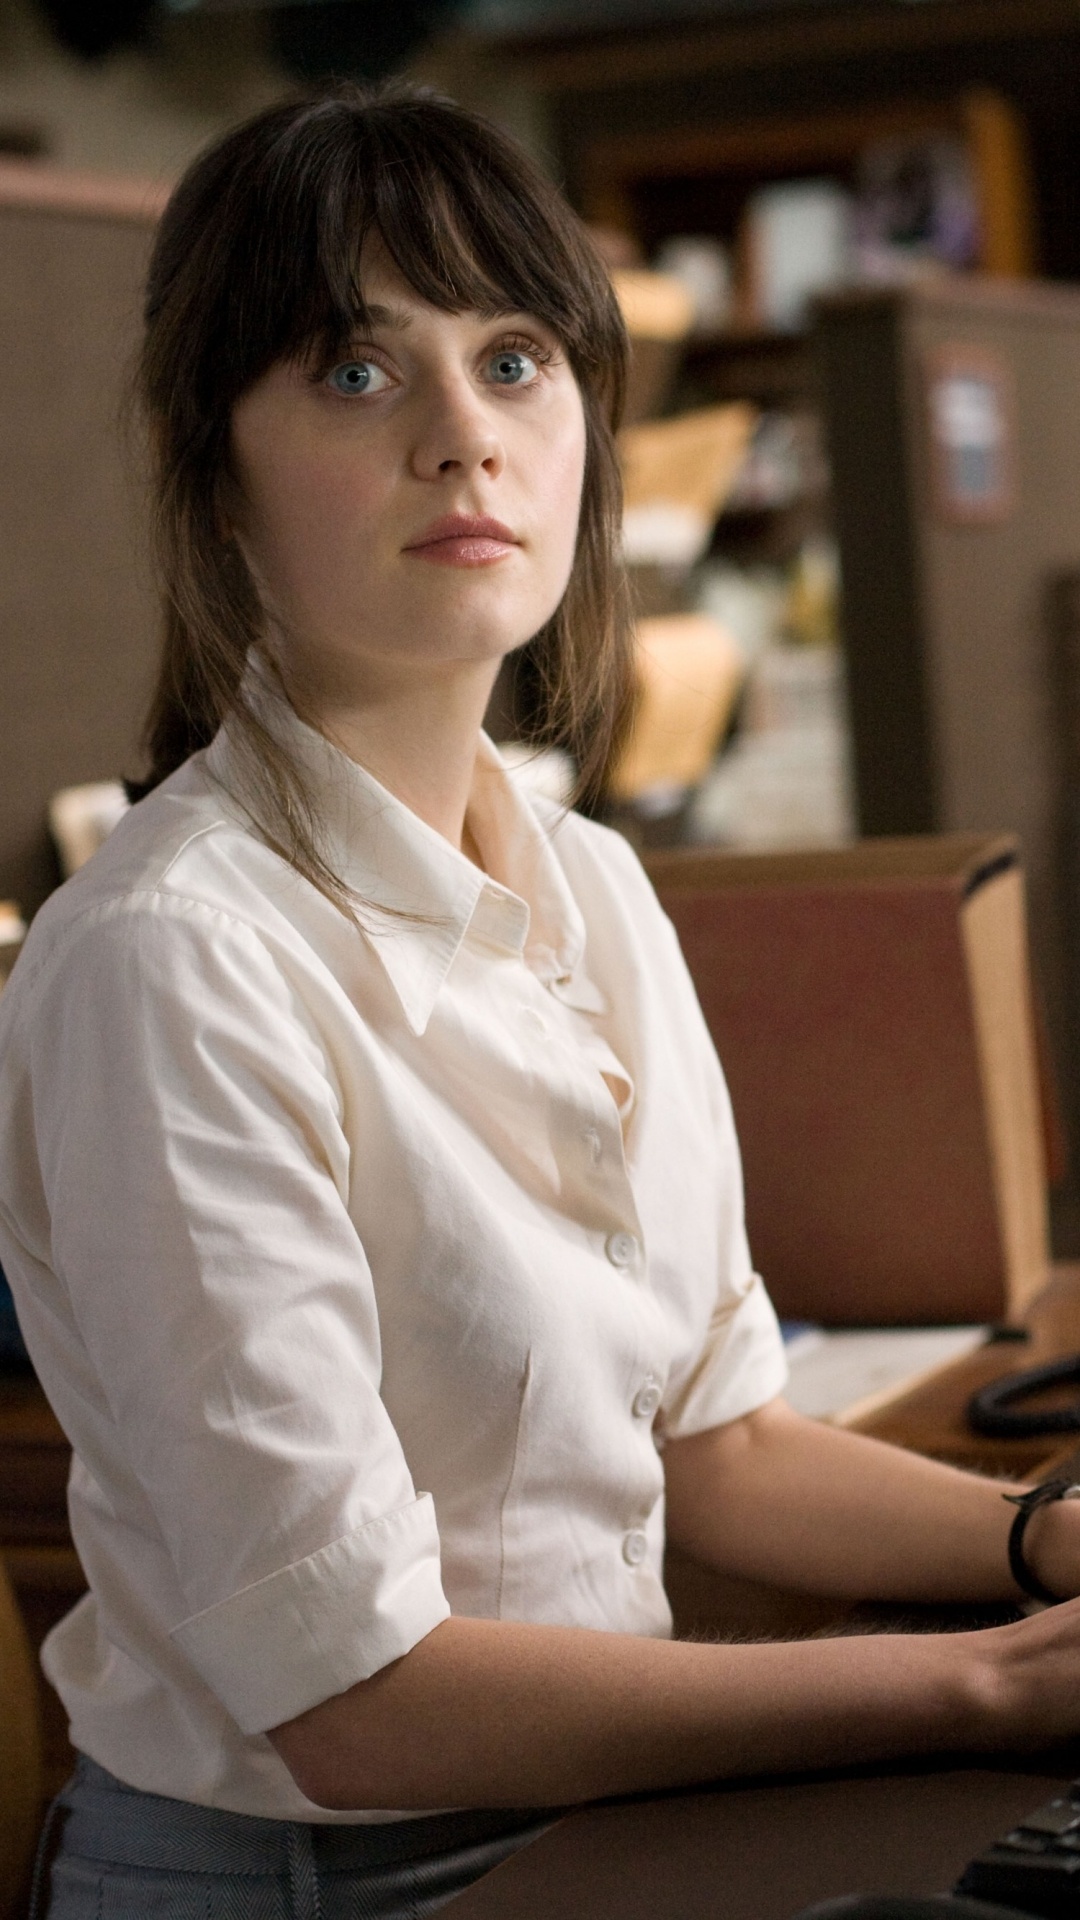 (500) Days of Summer: Finn, A fictional character appearing in the 2009 film. 1080x1920 Full HD Wallpaper.